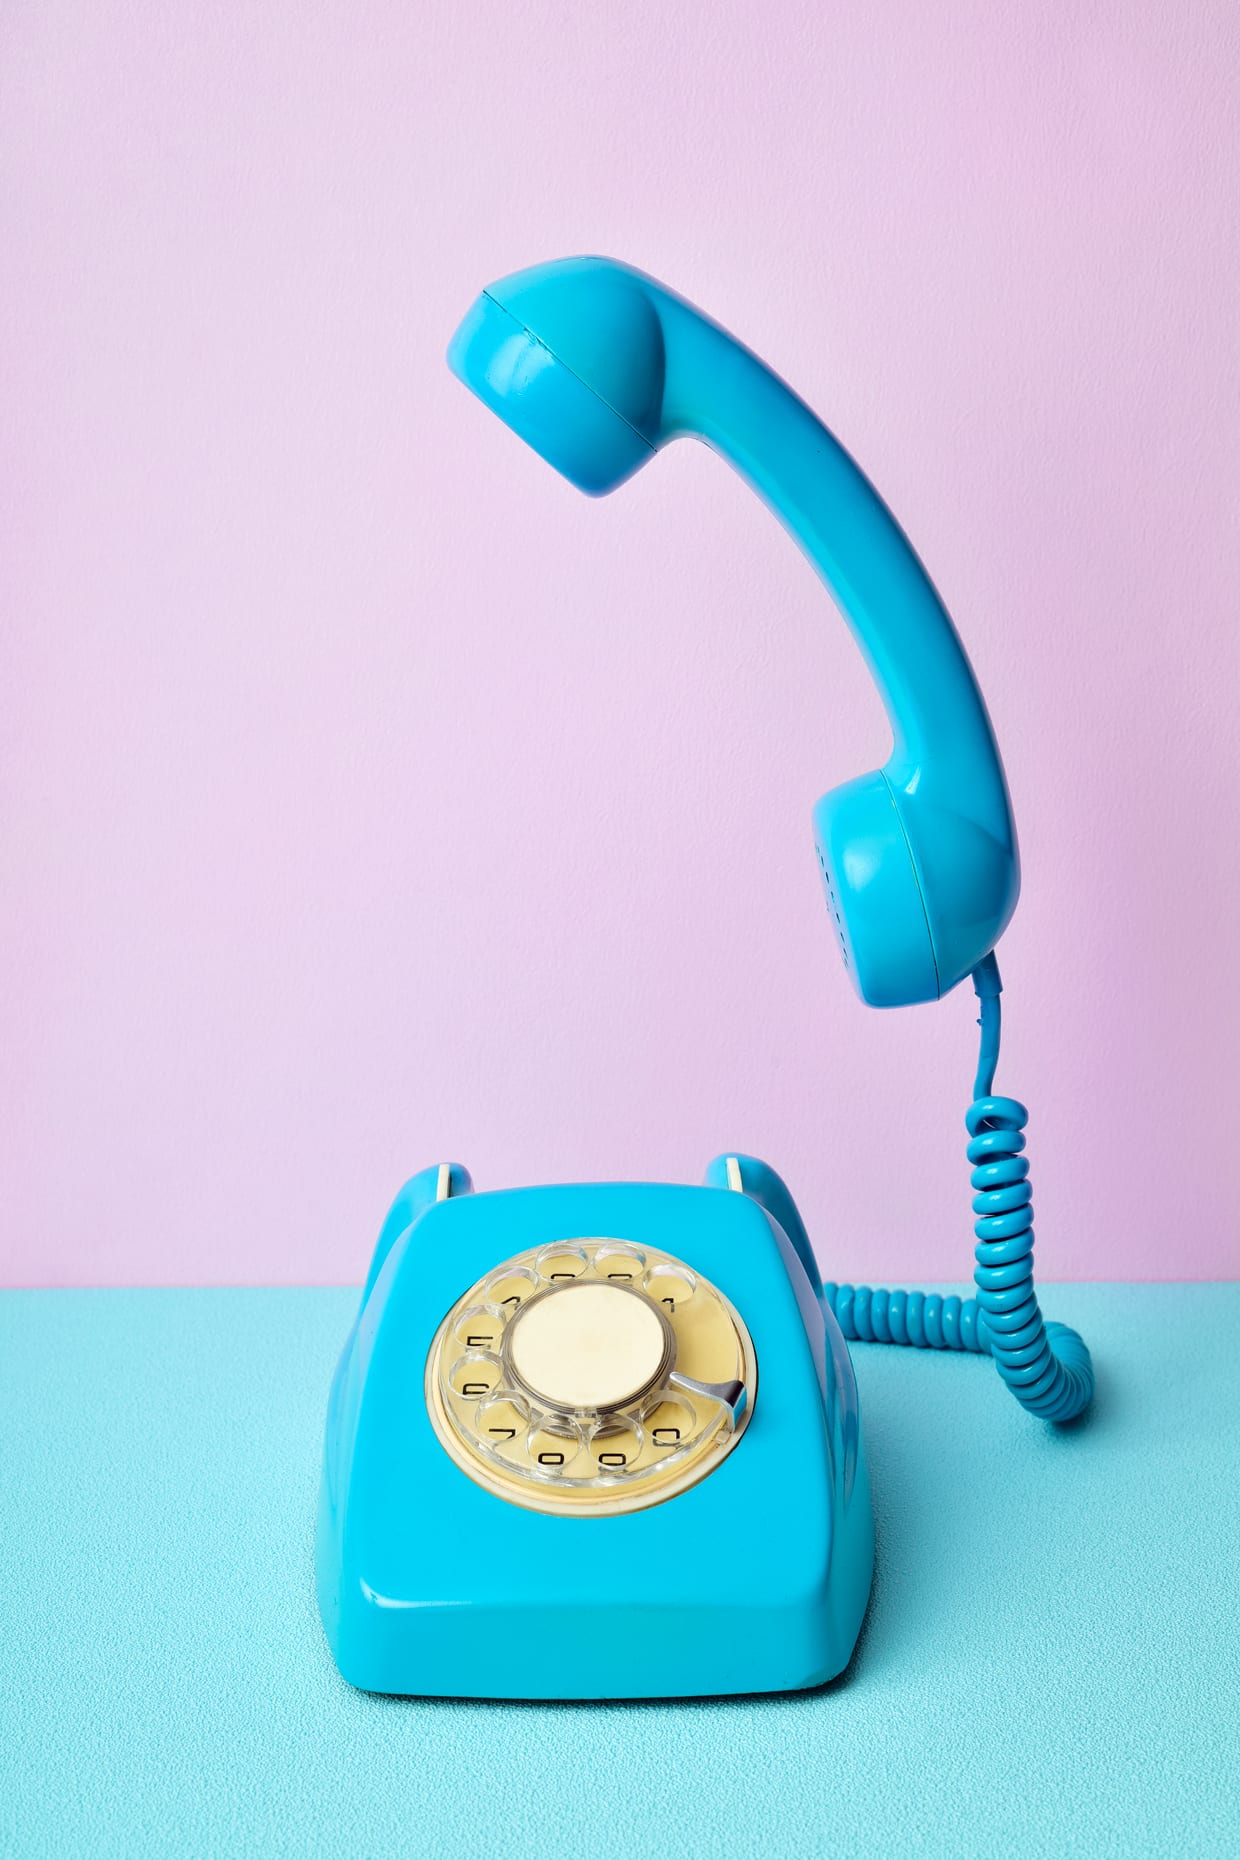 A light blue phone on a lavender and light blue background.